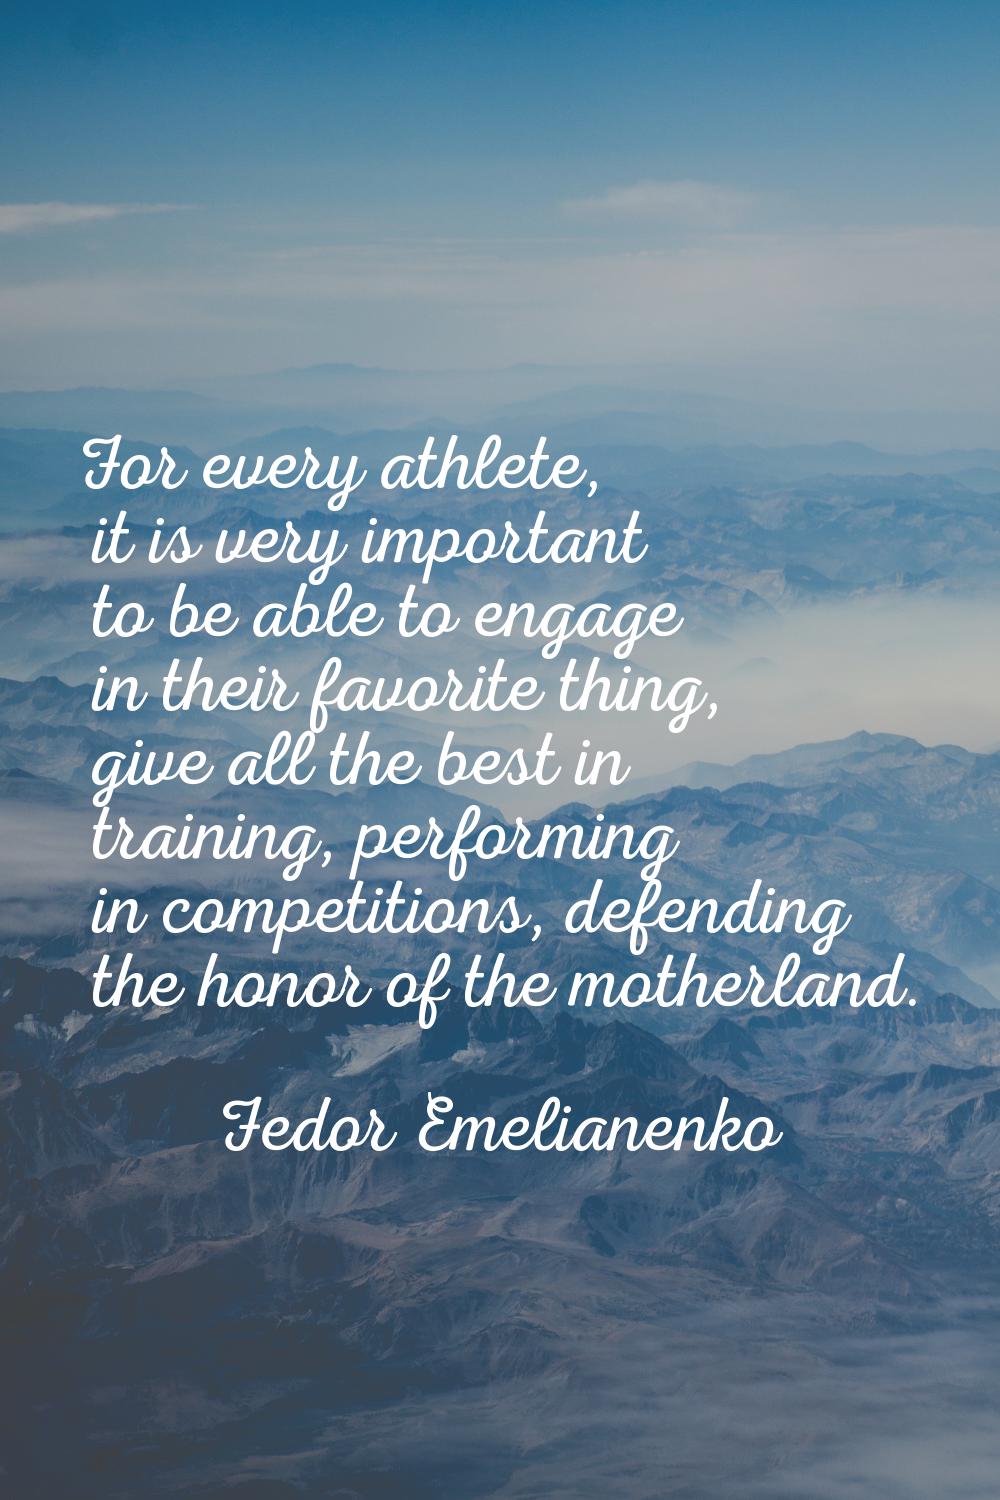 For every athlete, it is very important to be able to engage in their favorite thing, give all the 